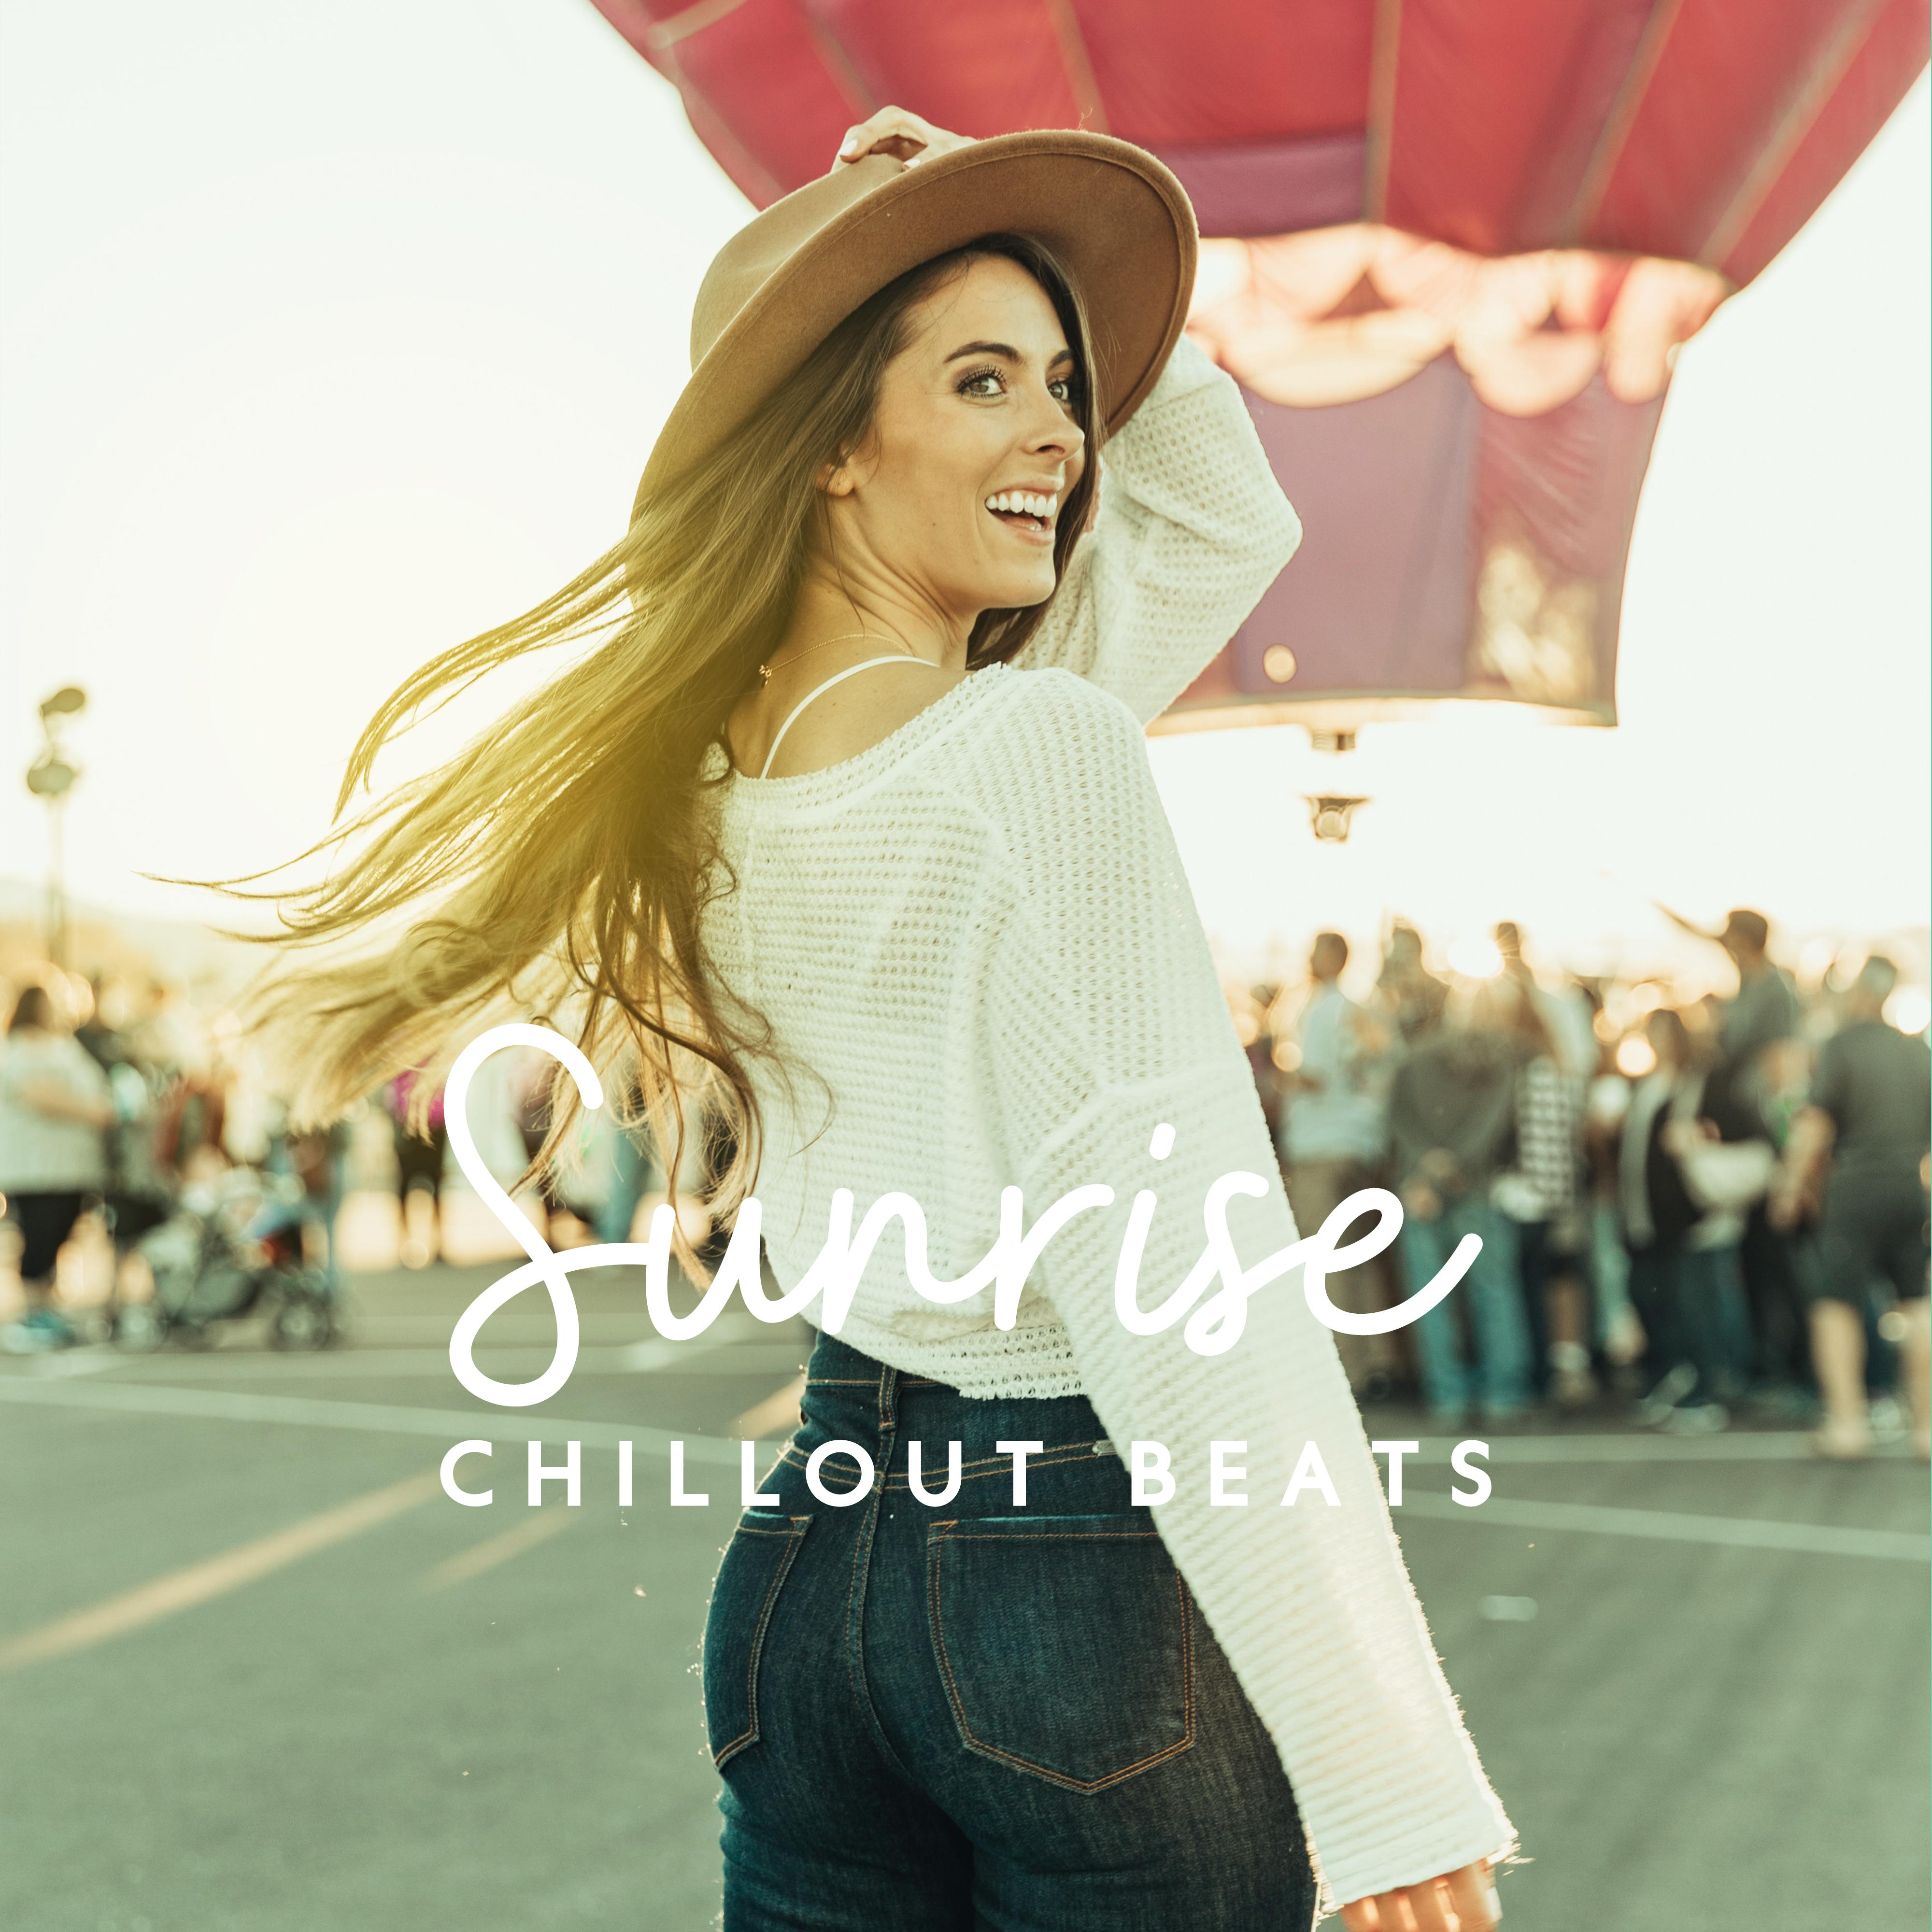 Sunrise Chillout Beats: Electronic Chillout Music 2019, Deep Ambients & Soft Beats for Holiday Beach Relaxation & Summer Celebration, Vibes Perfect for Sunbathing, Calming Down & Rest